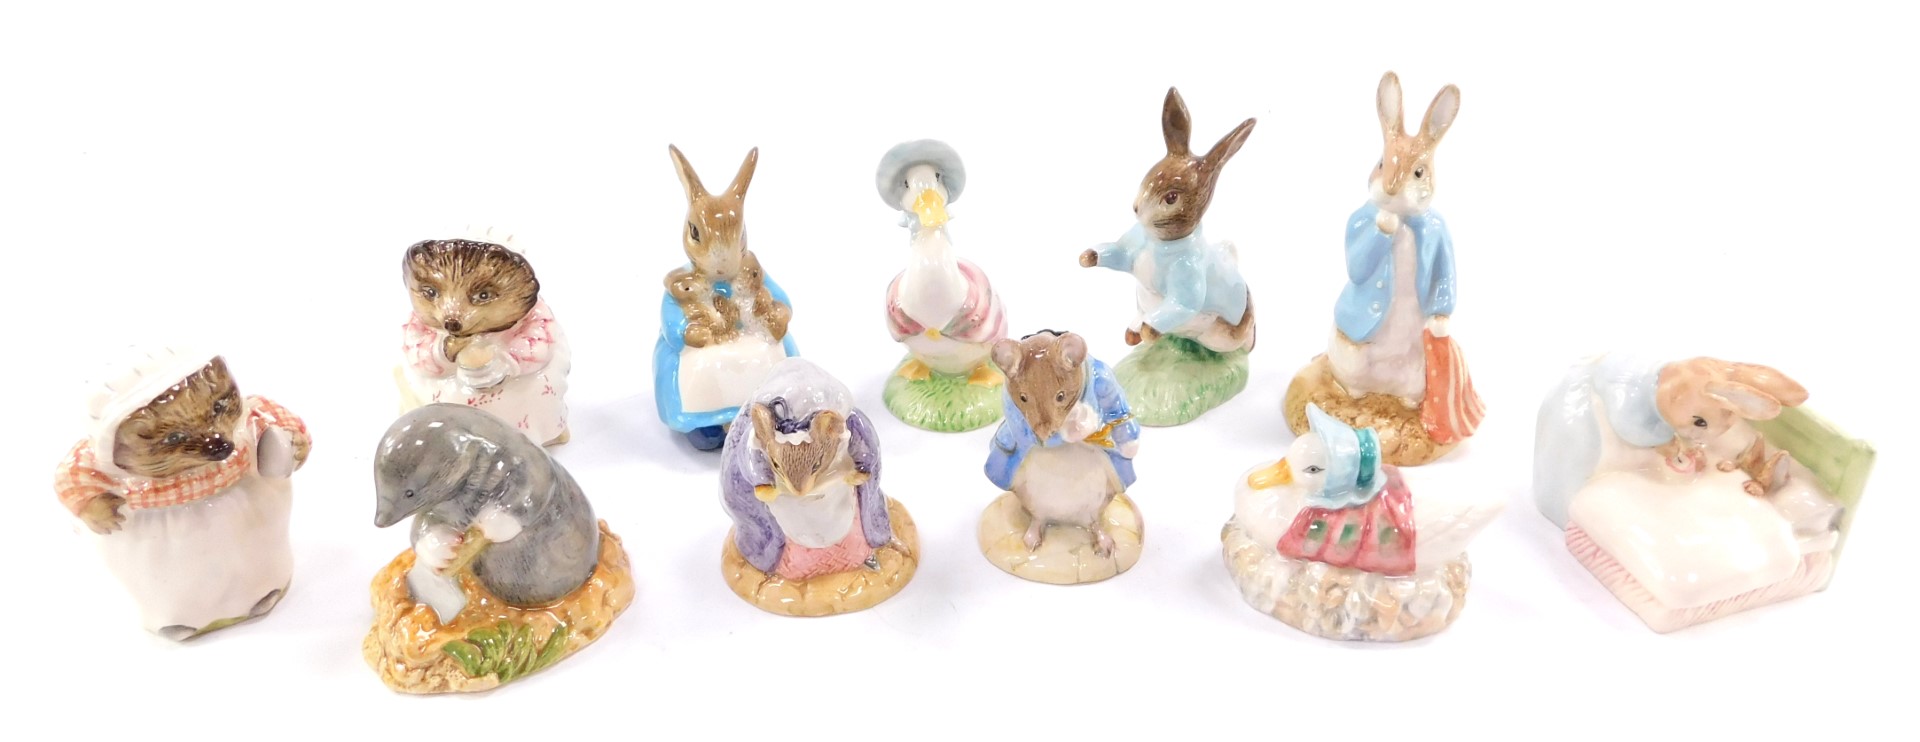 A selection of Beatrix Potter figures by Royal Albert, including Peter Rabbit, Mrs Rabbit and Bunnie